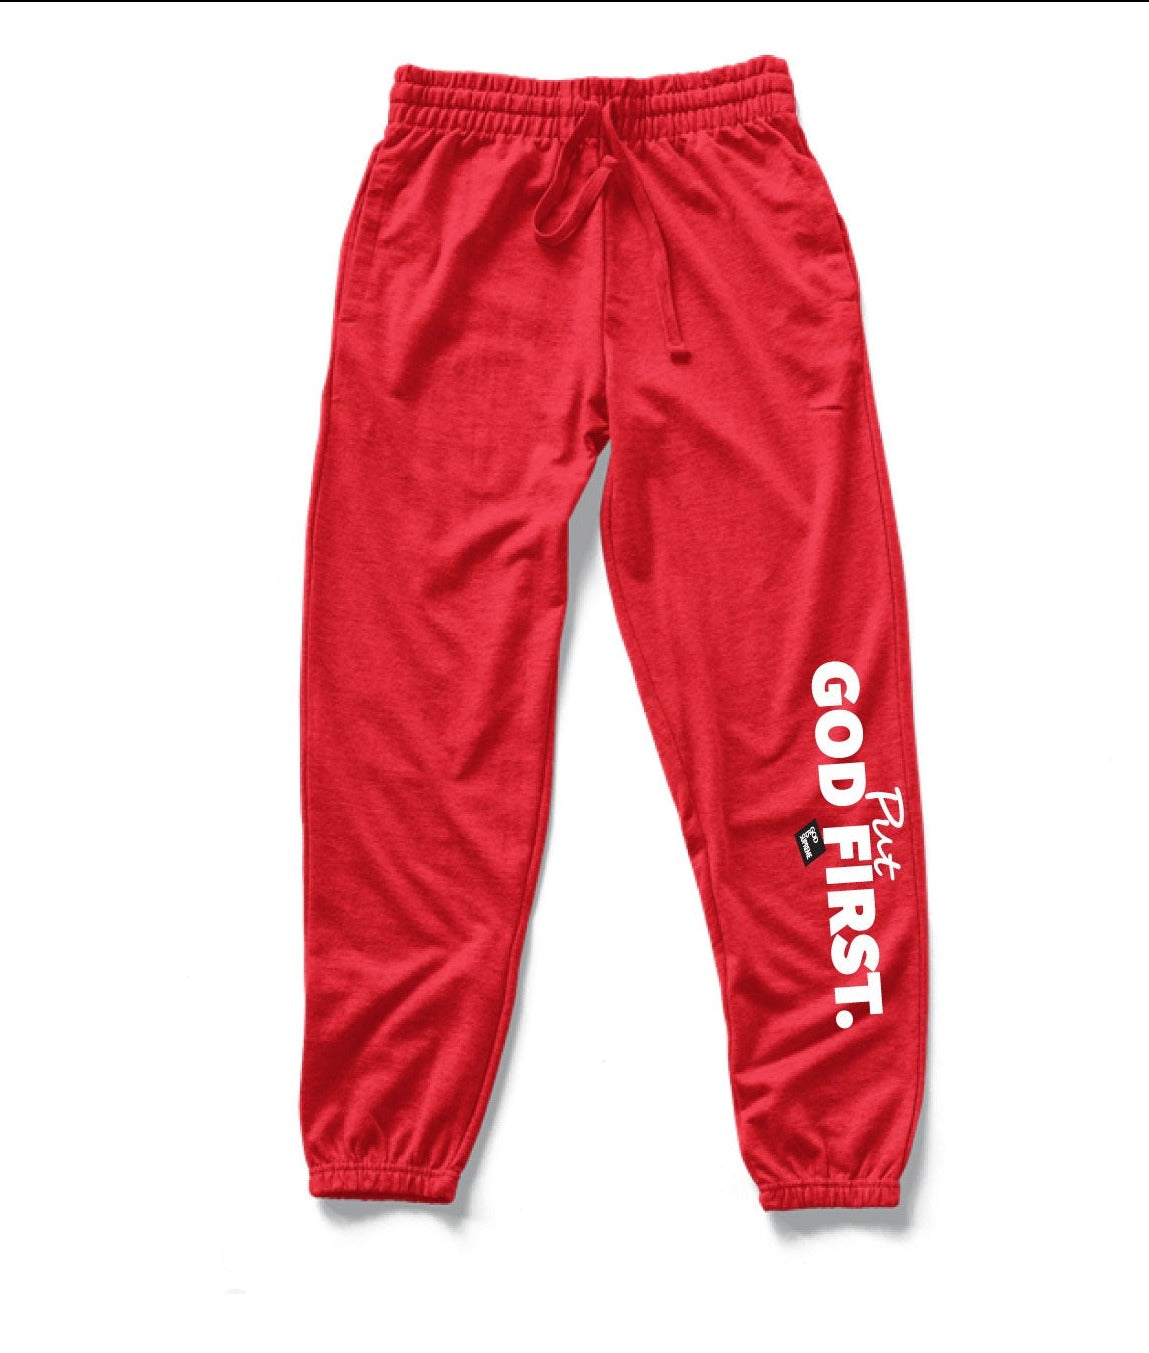 Put God First with Box Logo/Red Sweatpants